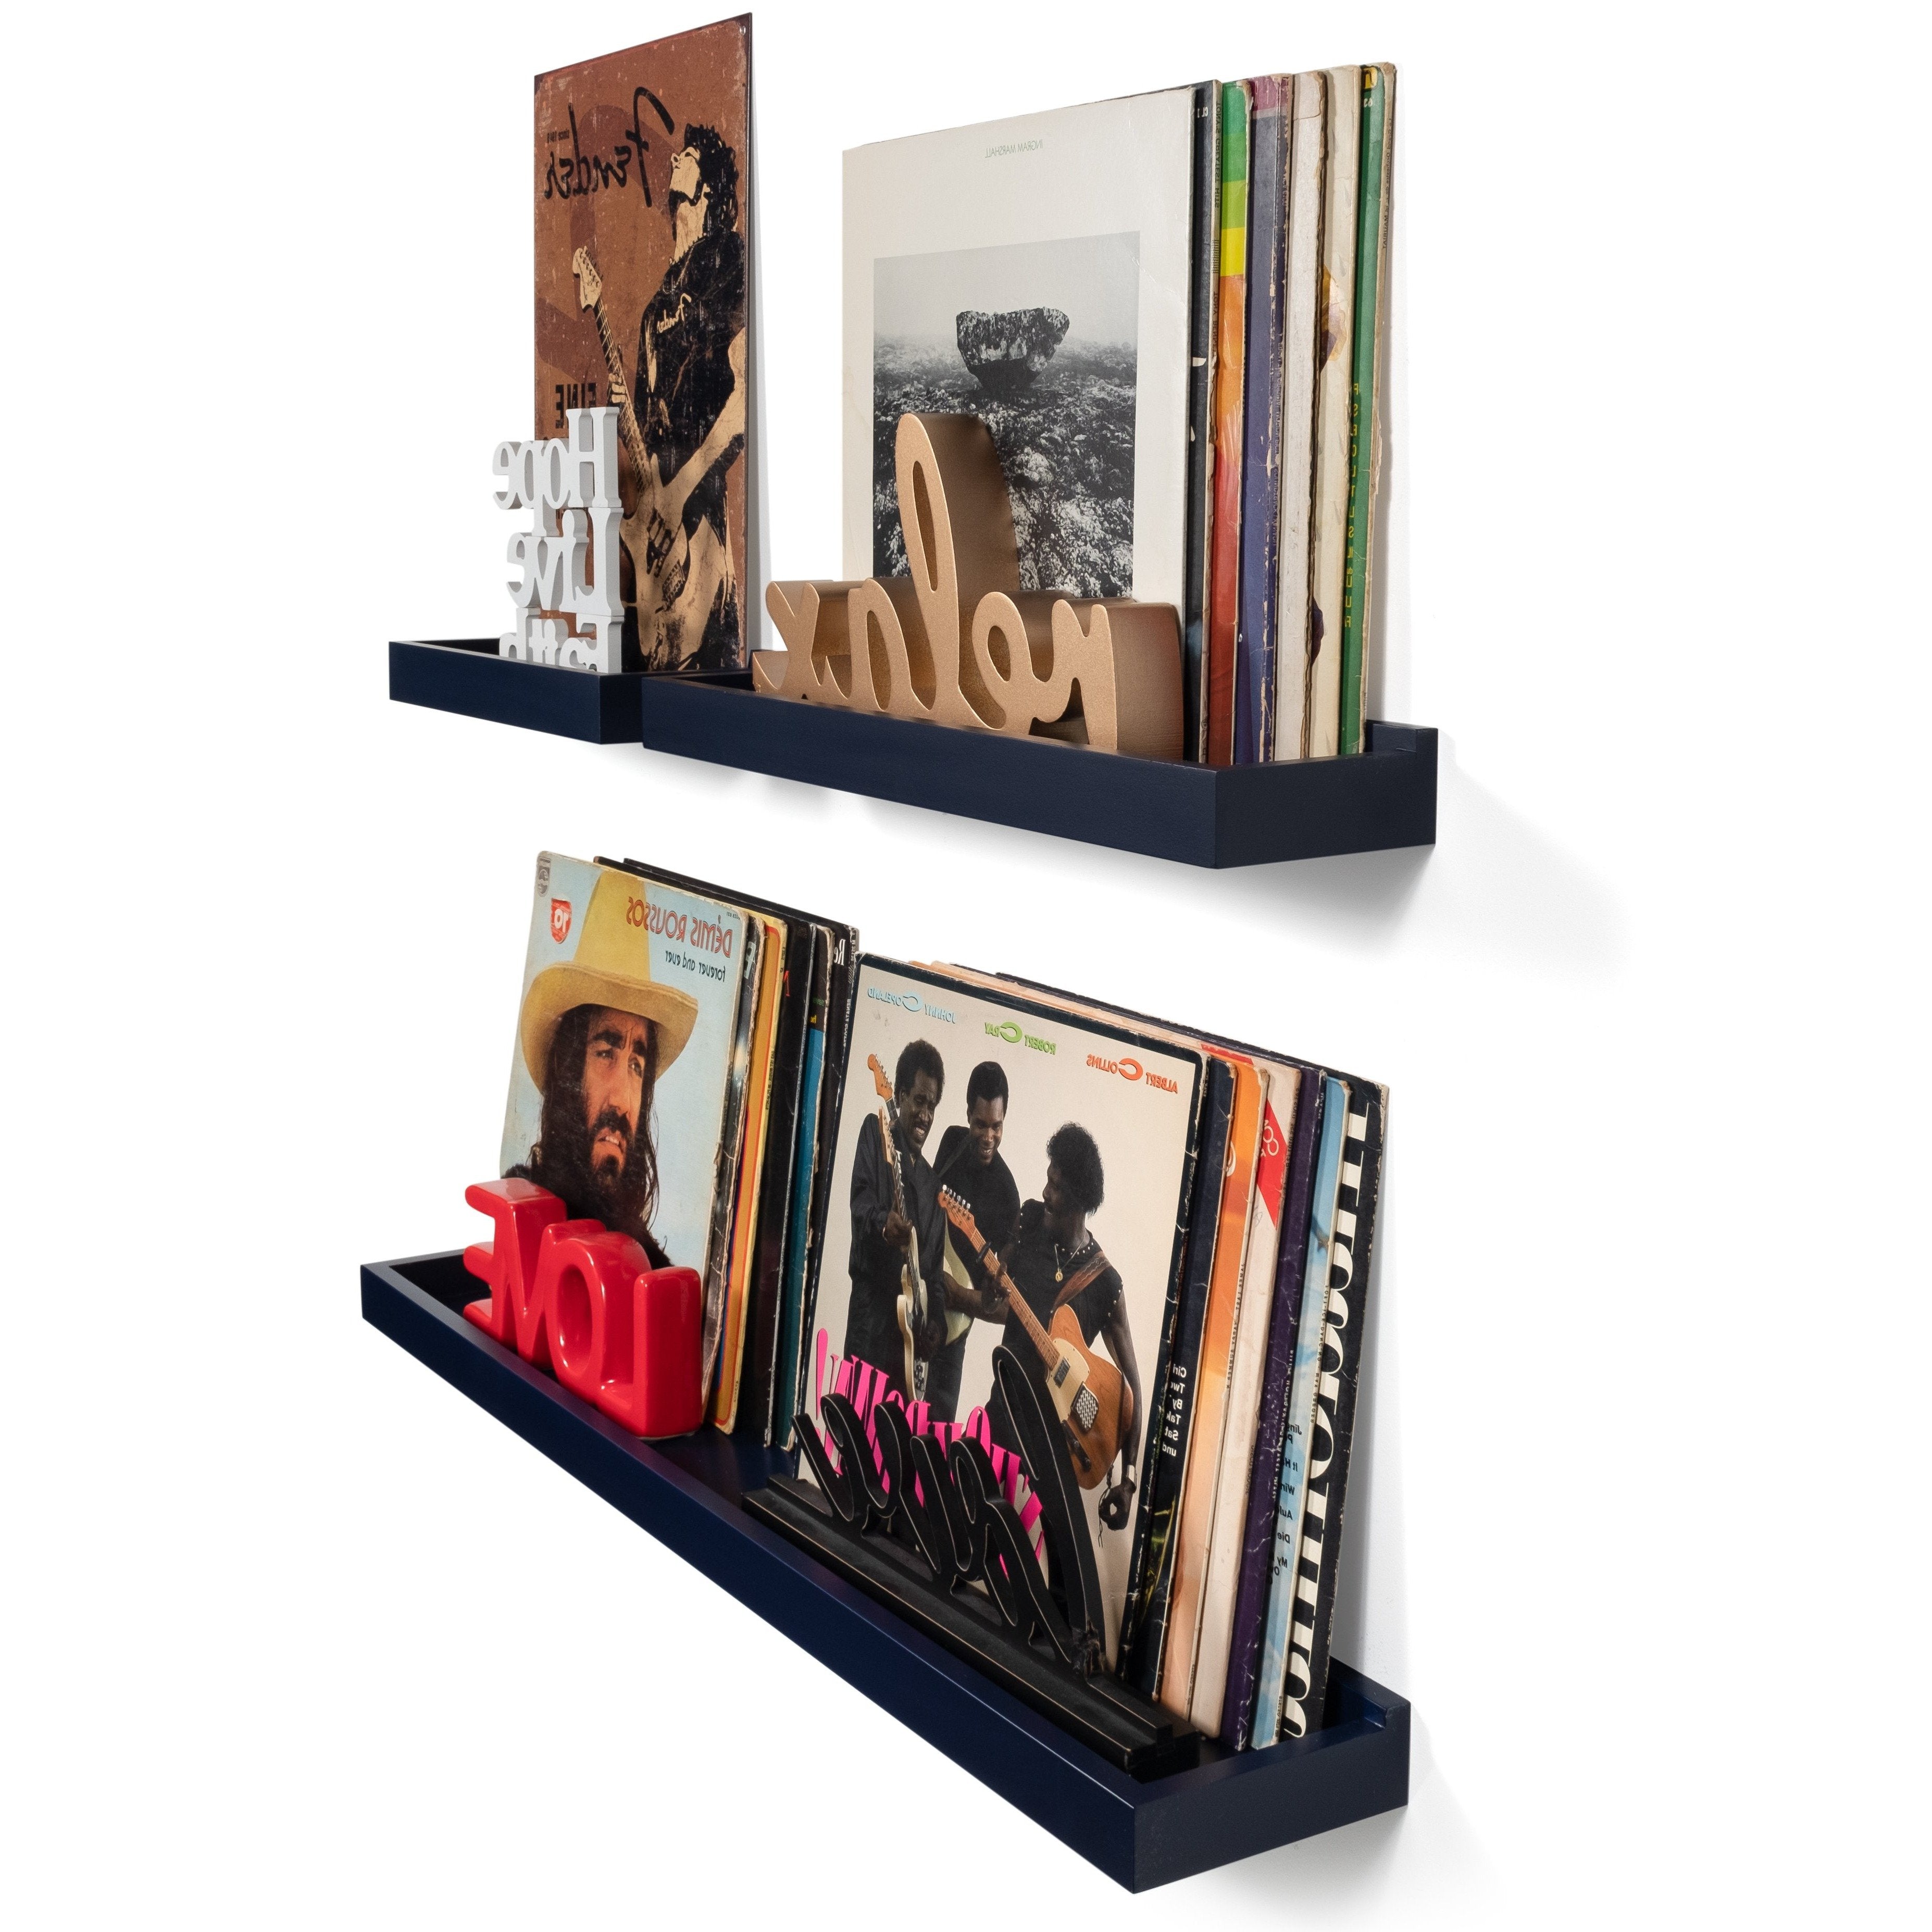 PHILLY Floating Shelves Wall Bookshelf and Picture Ledge for Bedroom Decor- Multisize - Set of 3 - White, Navy Blue, Gray, Walnut - Wallniture